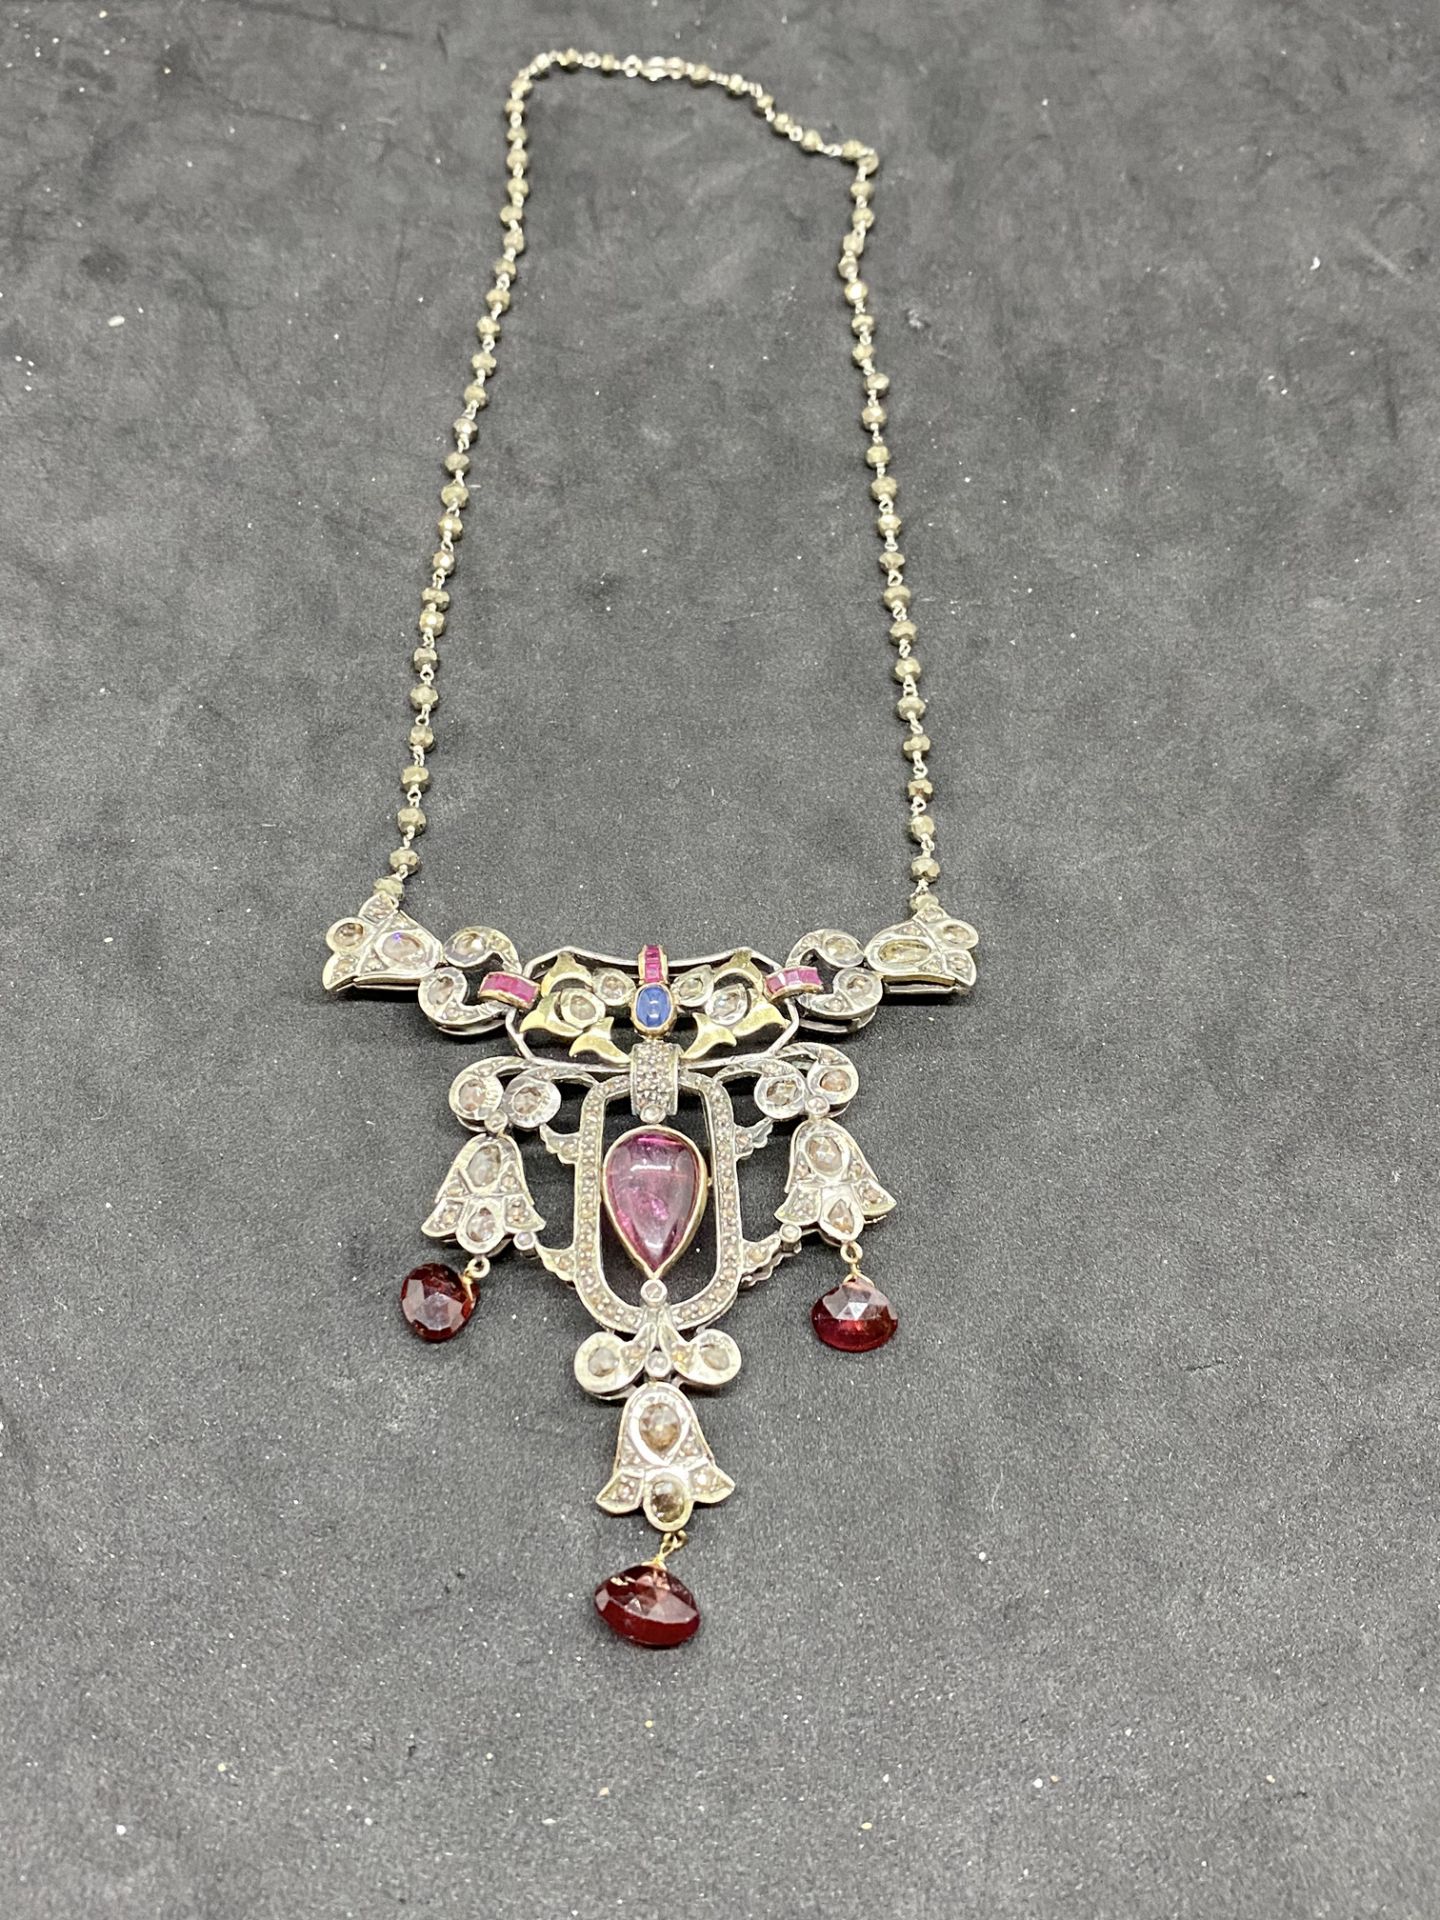 RUBY, ROSE DIAMOND, GARNET & SAPPHIRE SET NECKLACE IN YELLOW & WHITE METAL TESTED AS SILVER & GOLD - Image 8 of 12